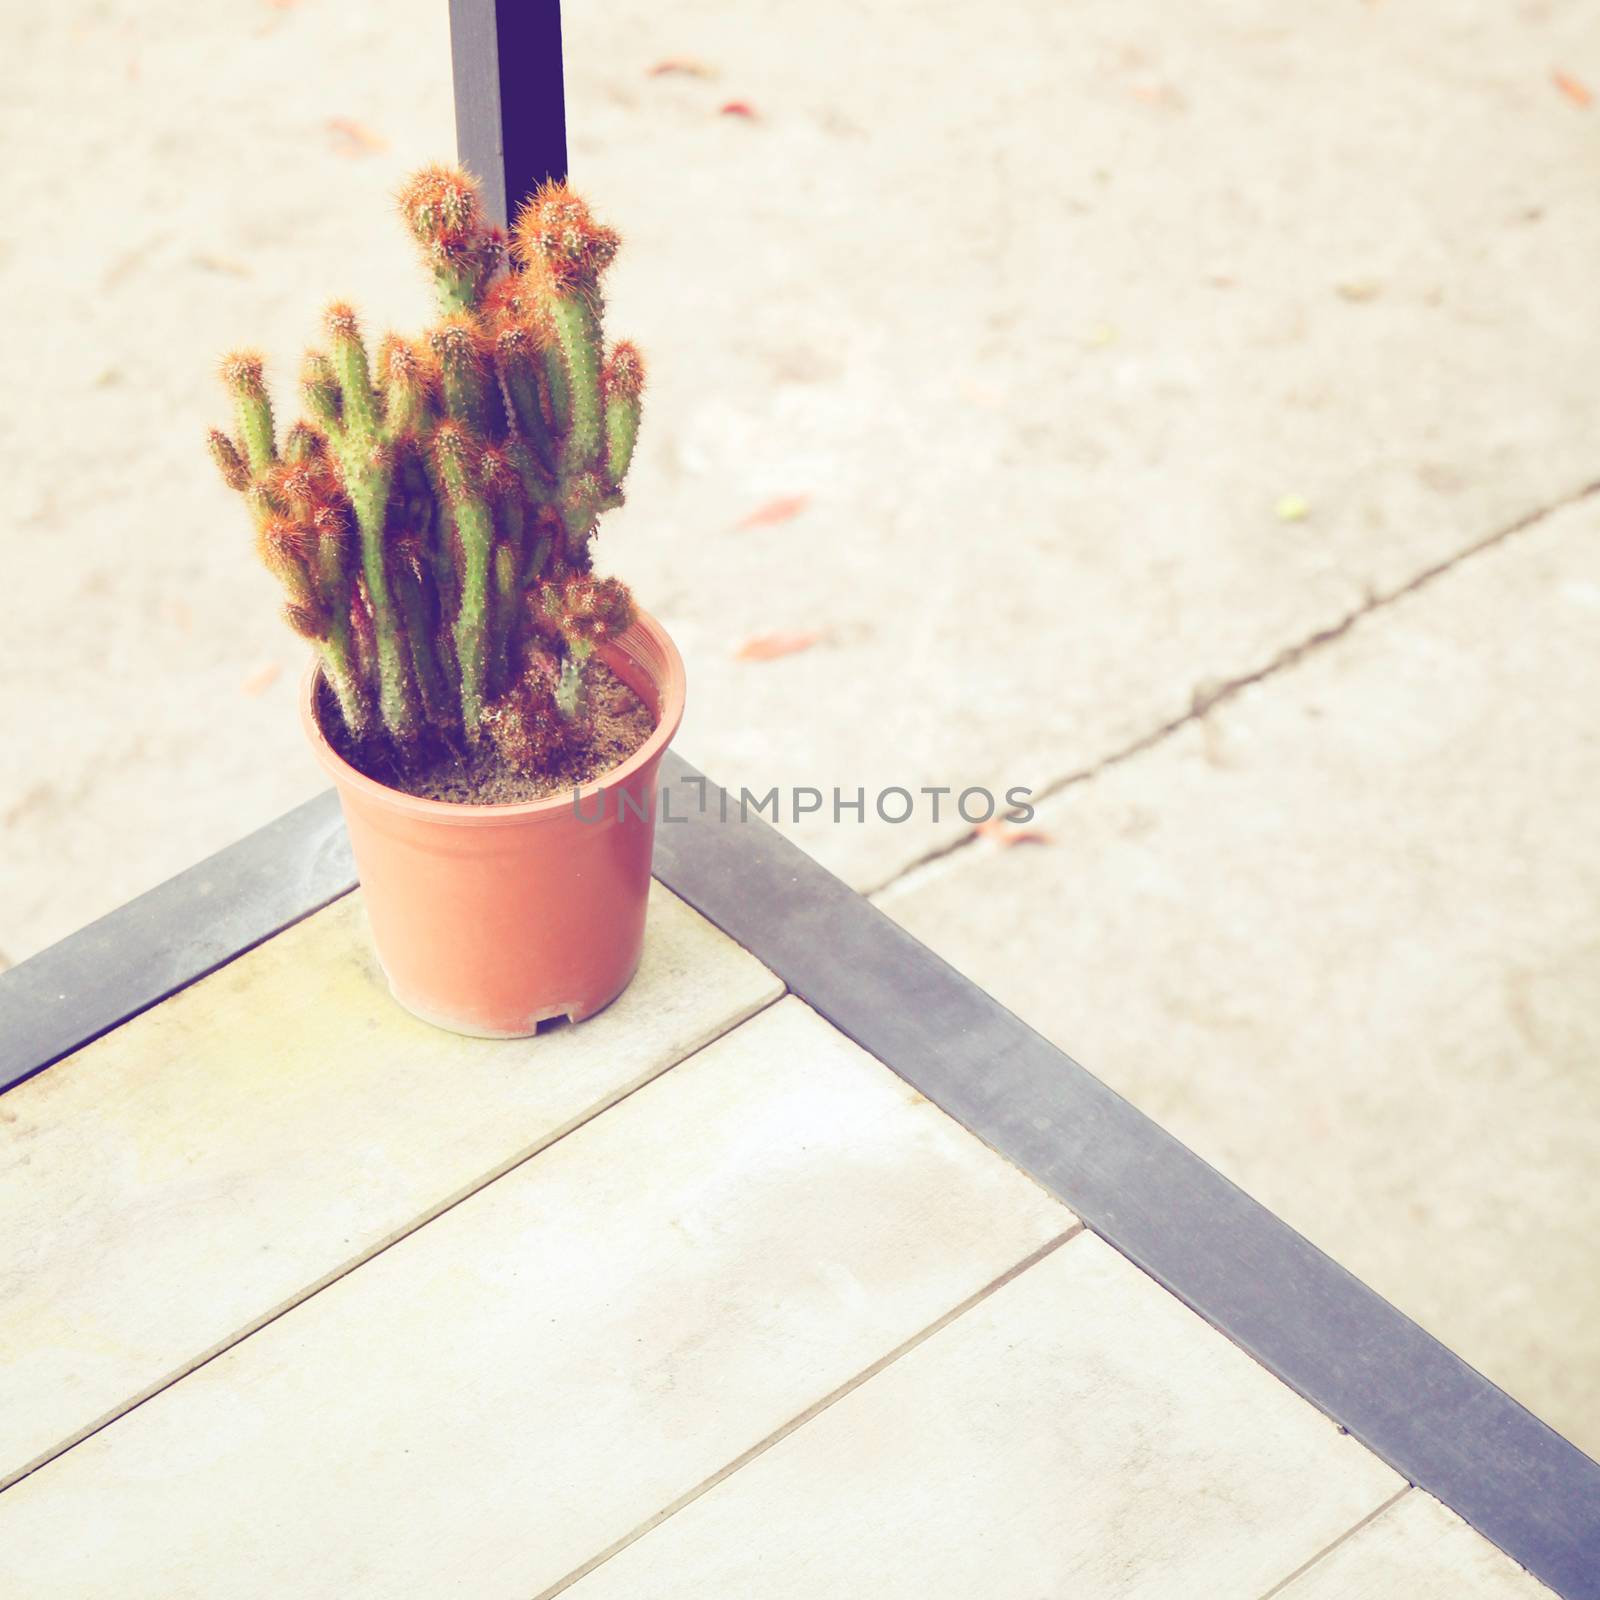 Small cactus plant in flower pot with retro filter effect